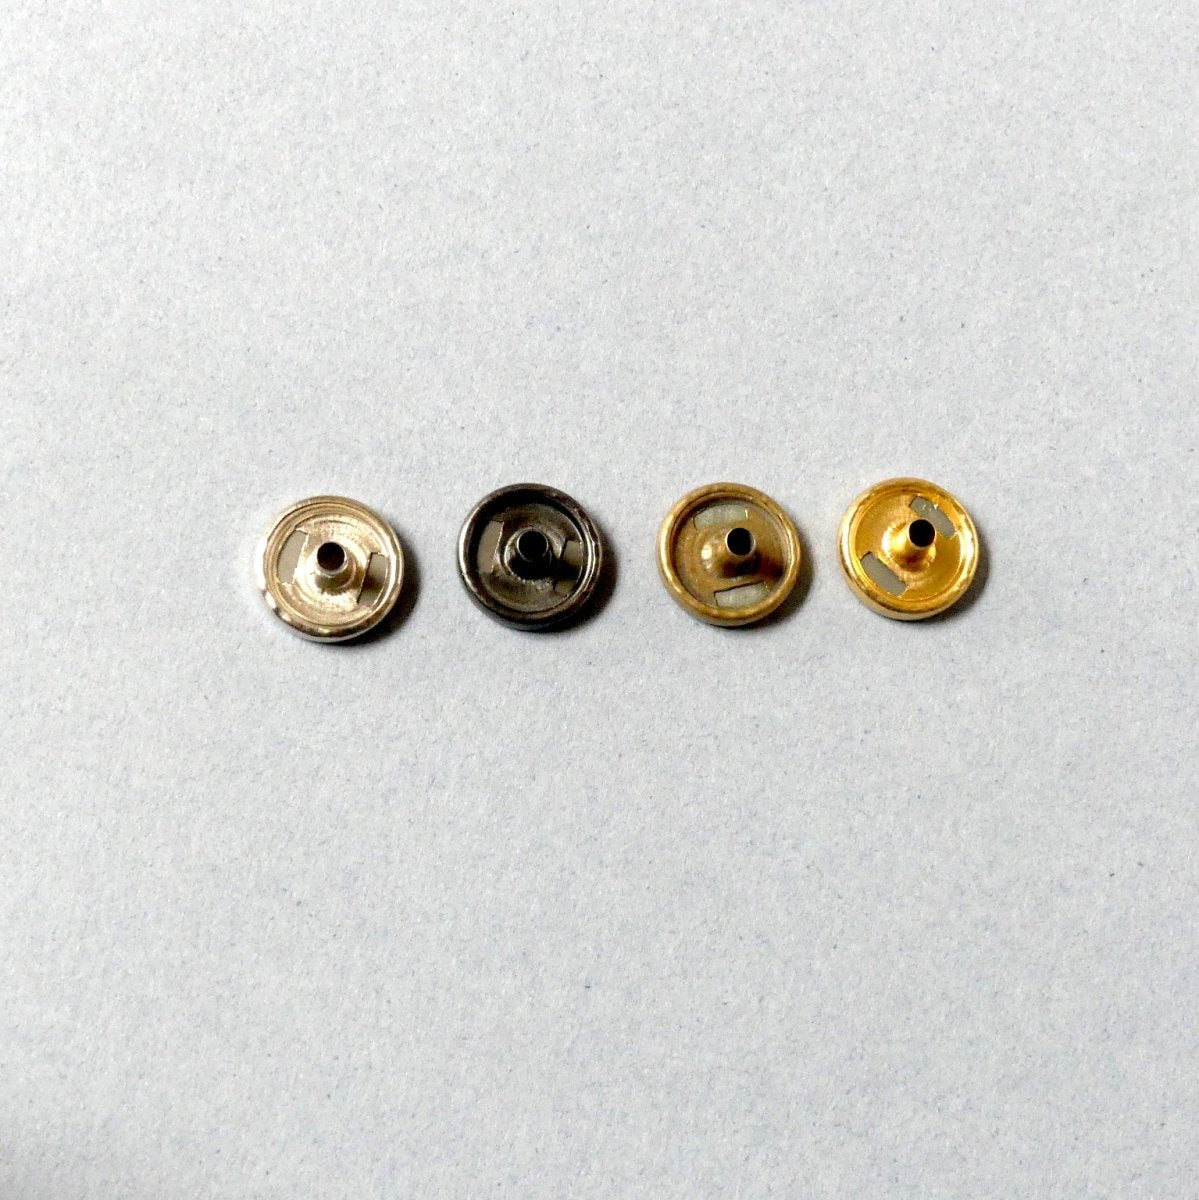 20PCS Snap Fastener Metal Pants Buttons for Clothing Jeans Adjust Button  Self Increase Reduce Waist 17mm Sewing Buttons